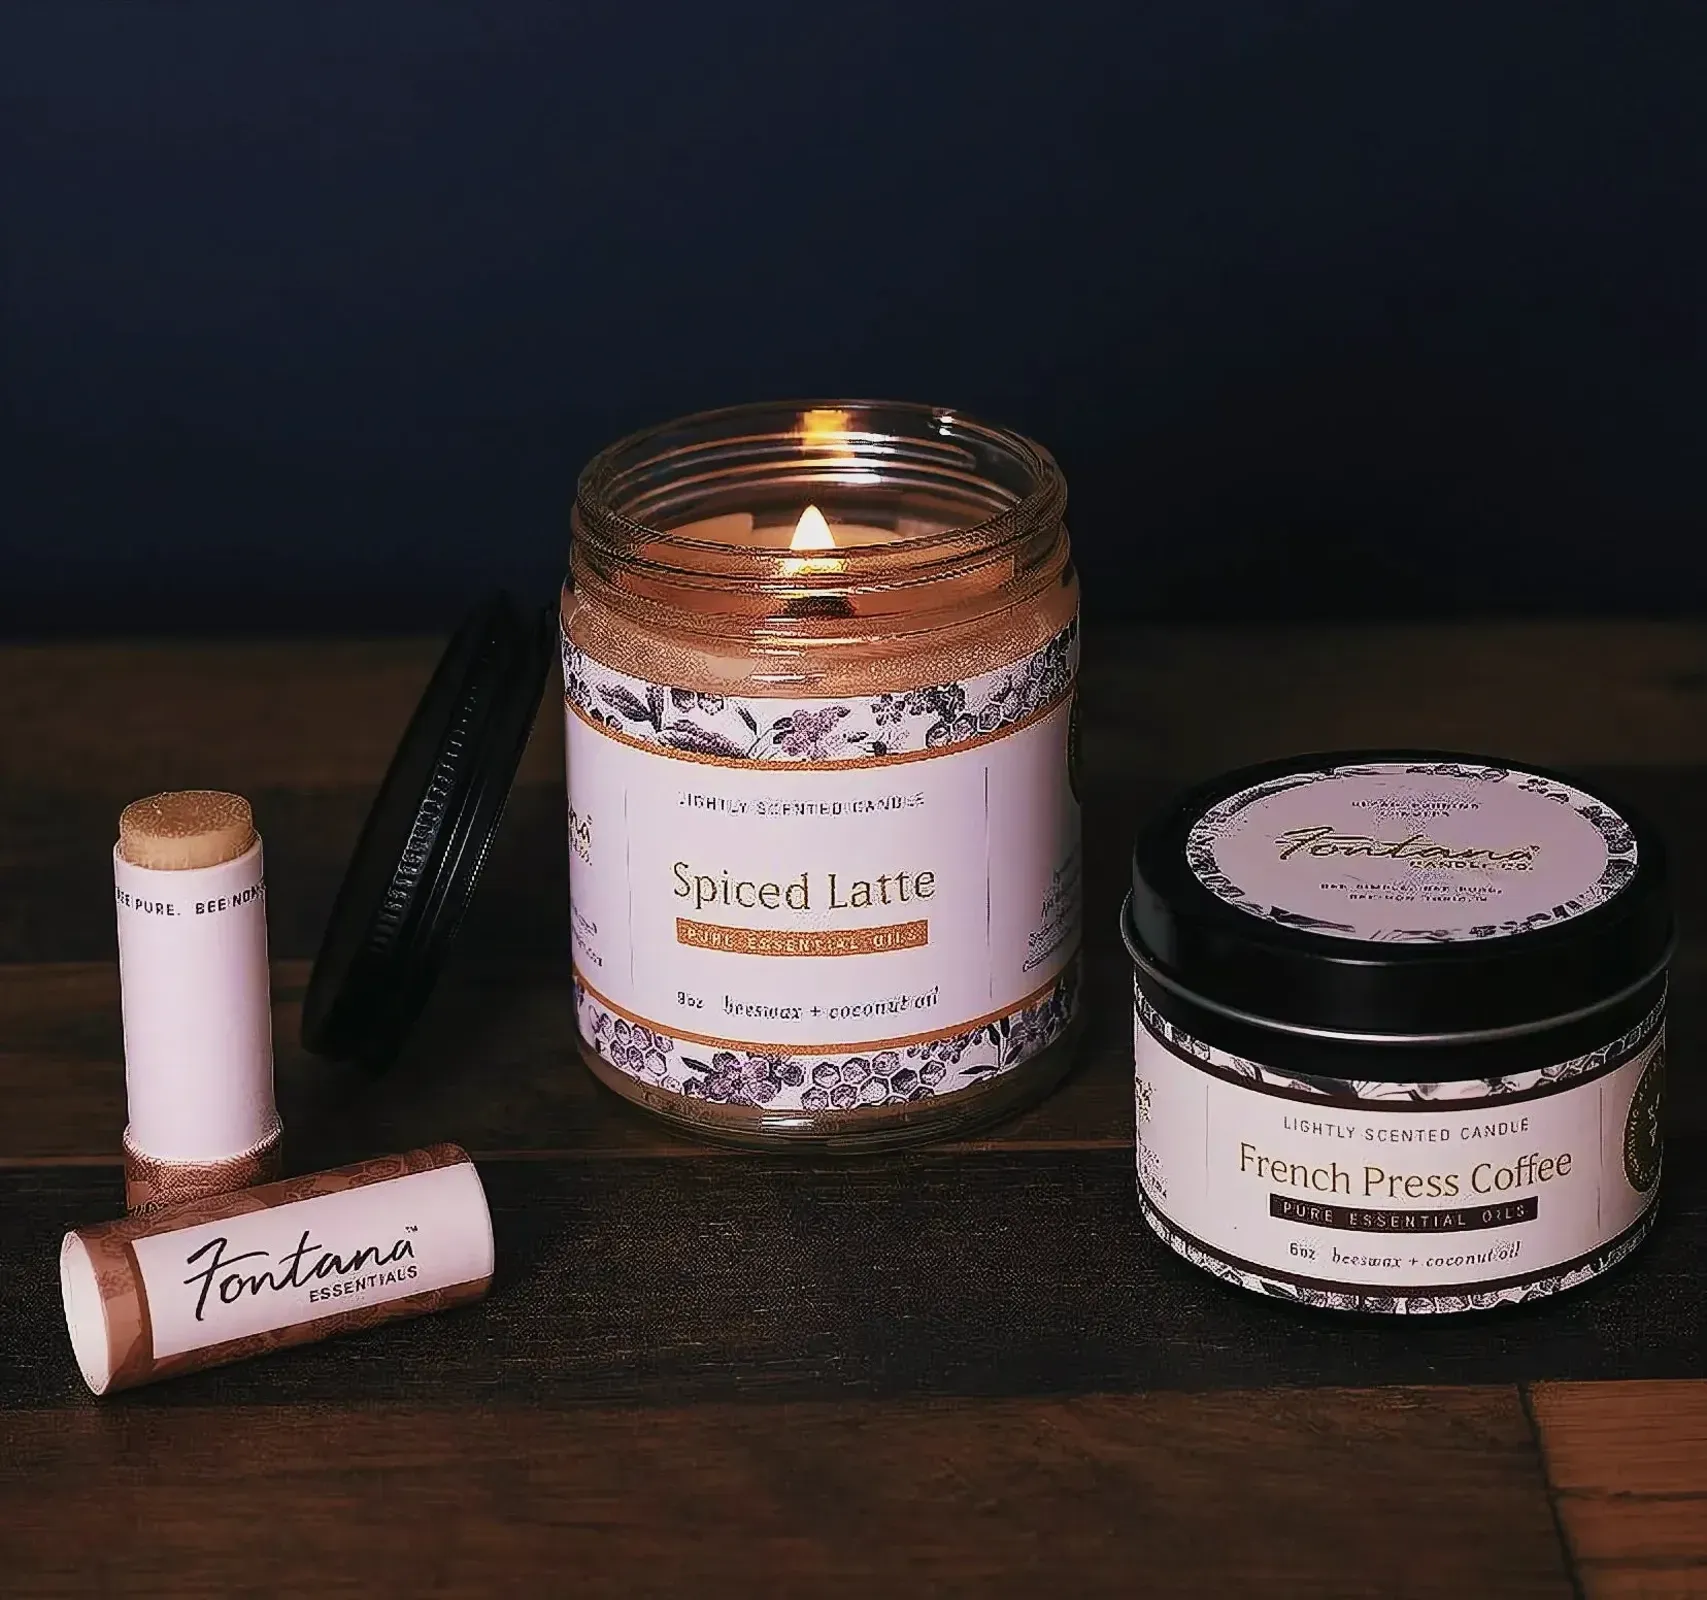 Cozy display of non-toxic candles and skincare products